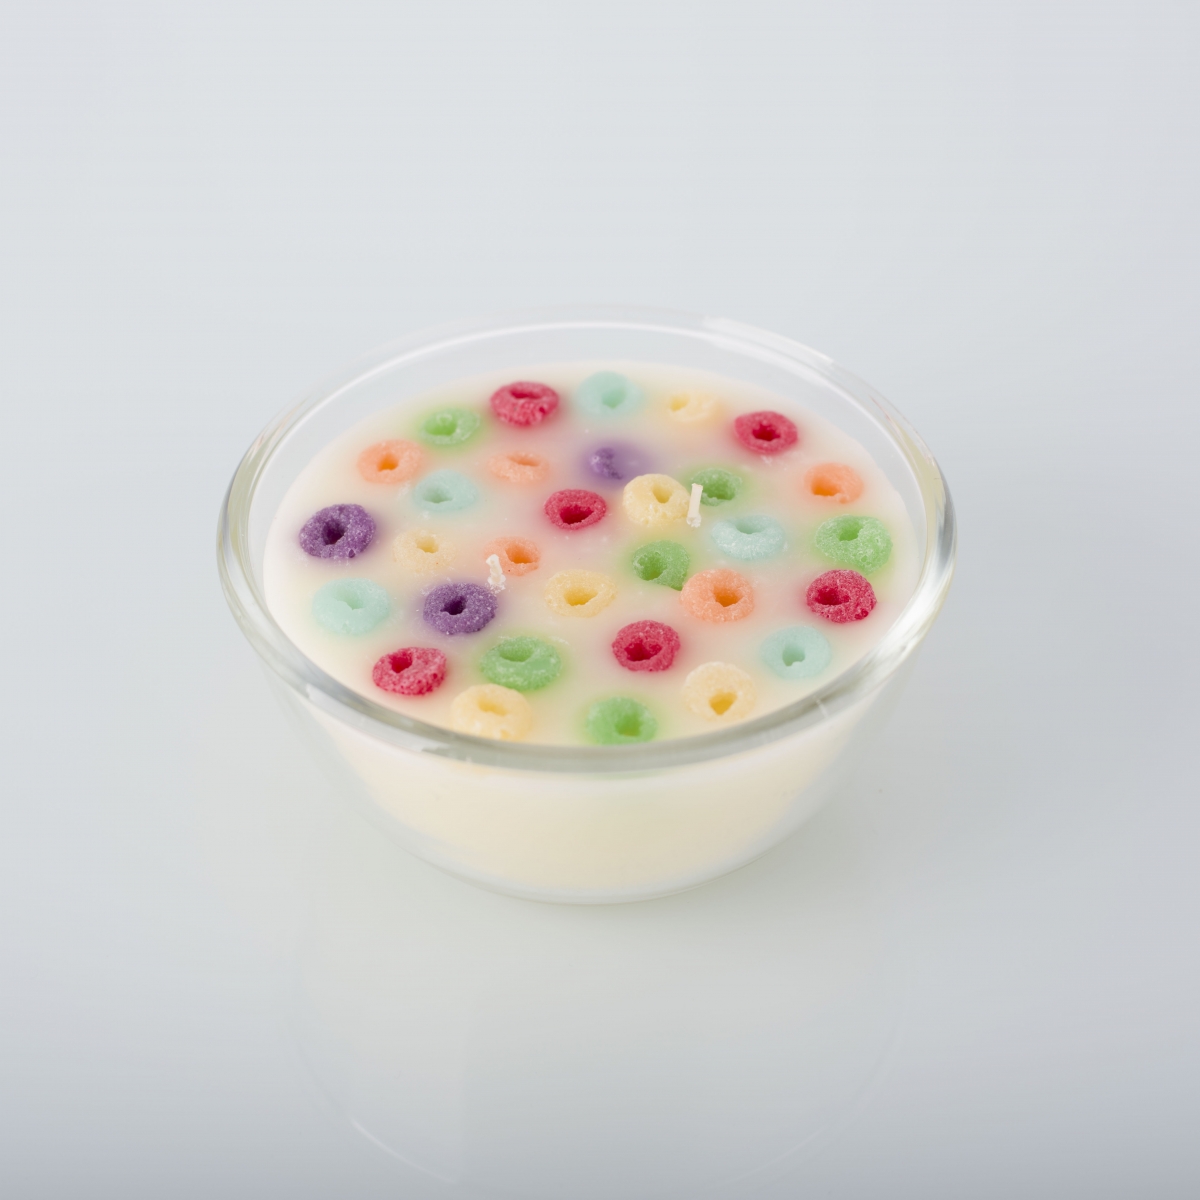 Scented Candles : Fruit Loops ,Cereal Bowl Candles , Soy Candles ,Kids Safe ,China Factory ,Best Price-HOWCANDLE-Candles,Scented Candles,Aromatherapy Candles,Soy Candles,Vegan Candles,Jar Candles,Pillar Candles,Candle Gift Sets,Essential Oils,Reed Diffuser,Candle Holder,